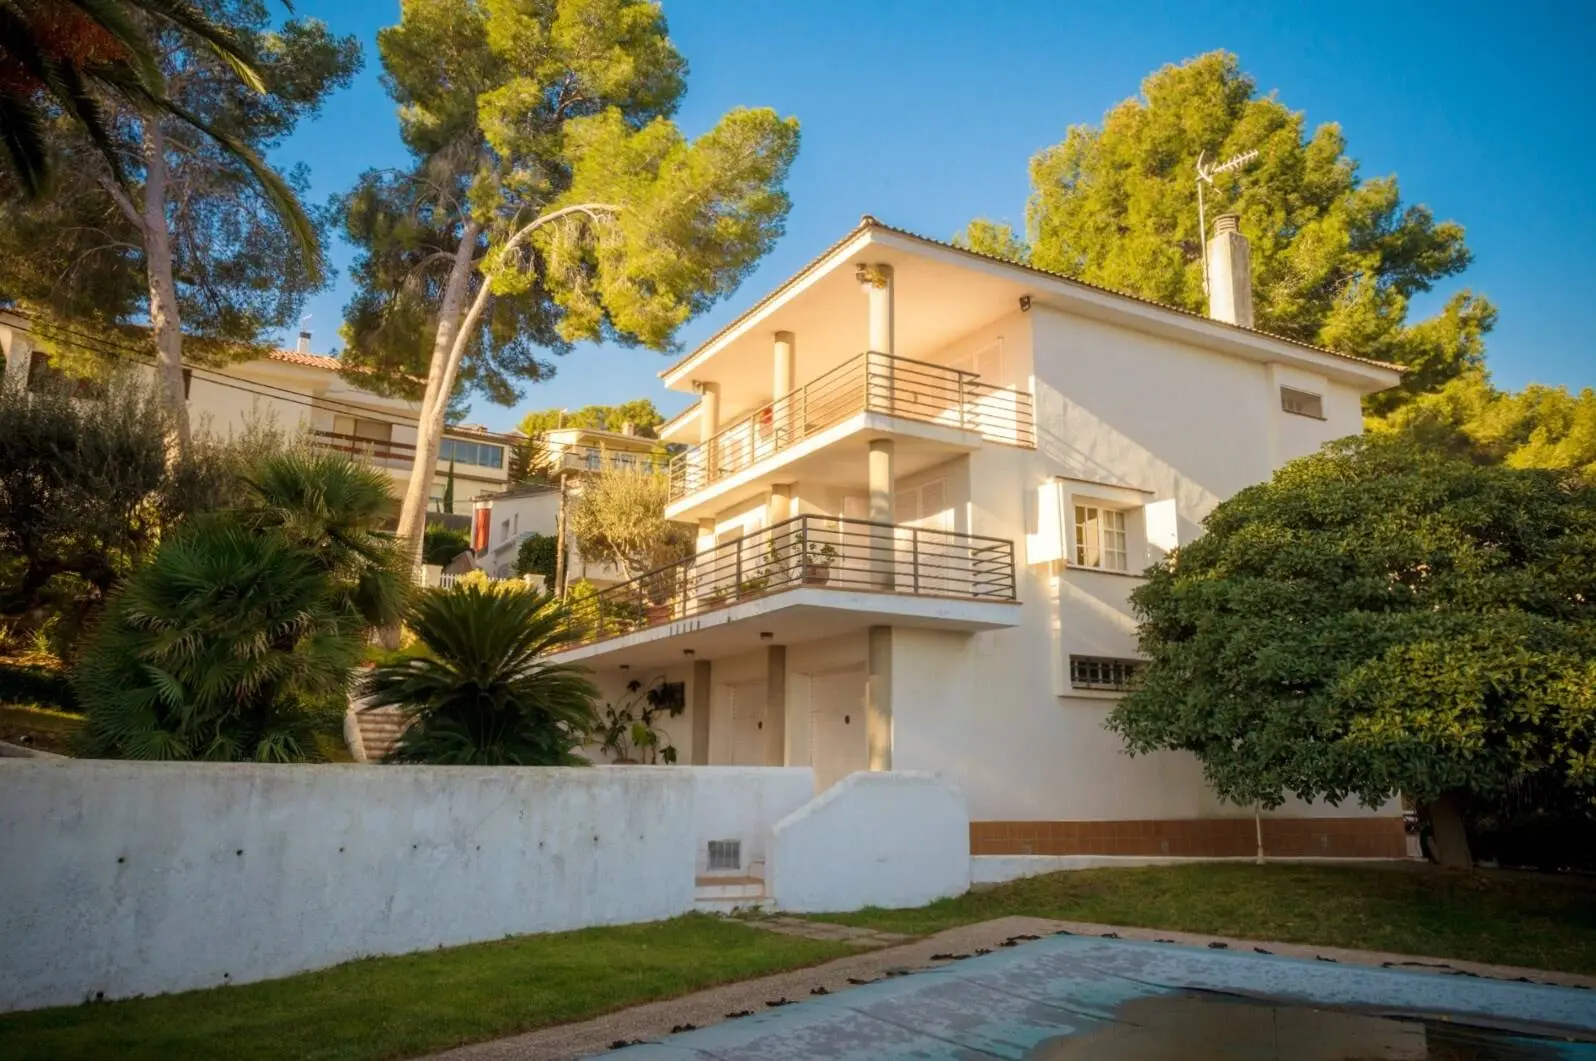 House for sale with a swimming pool in Castelldefels, Barcelona. 29